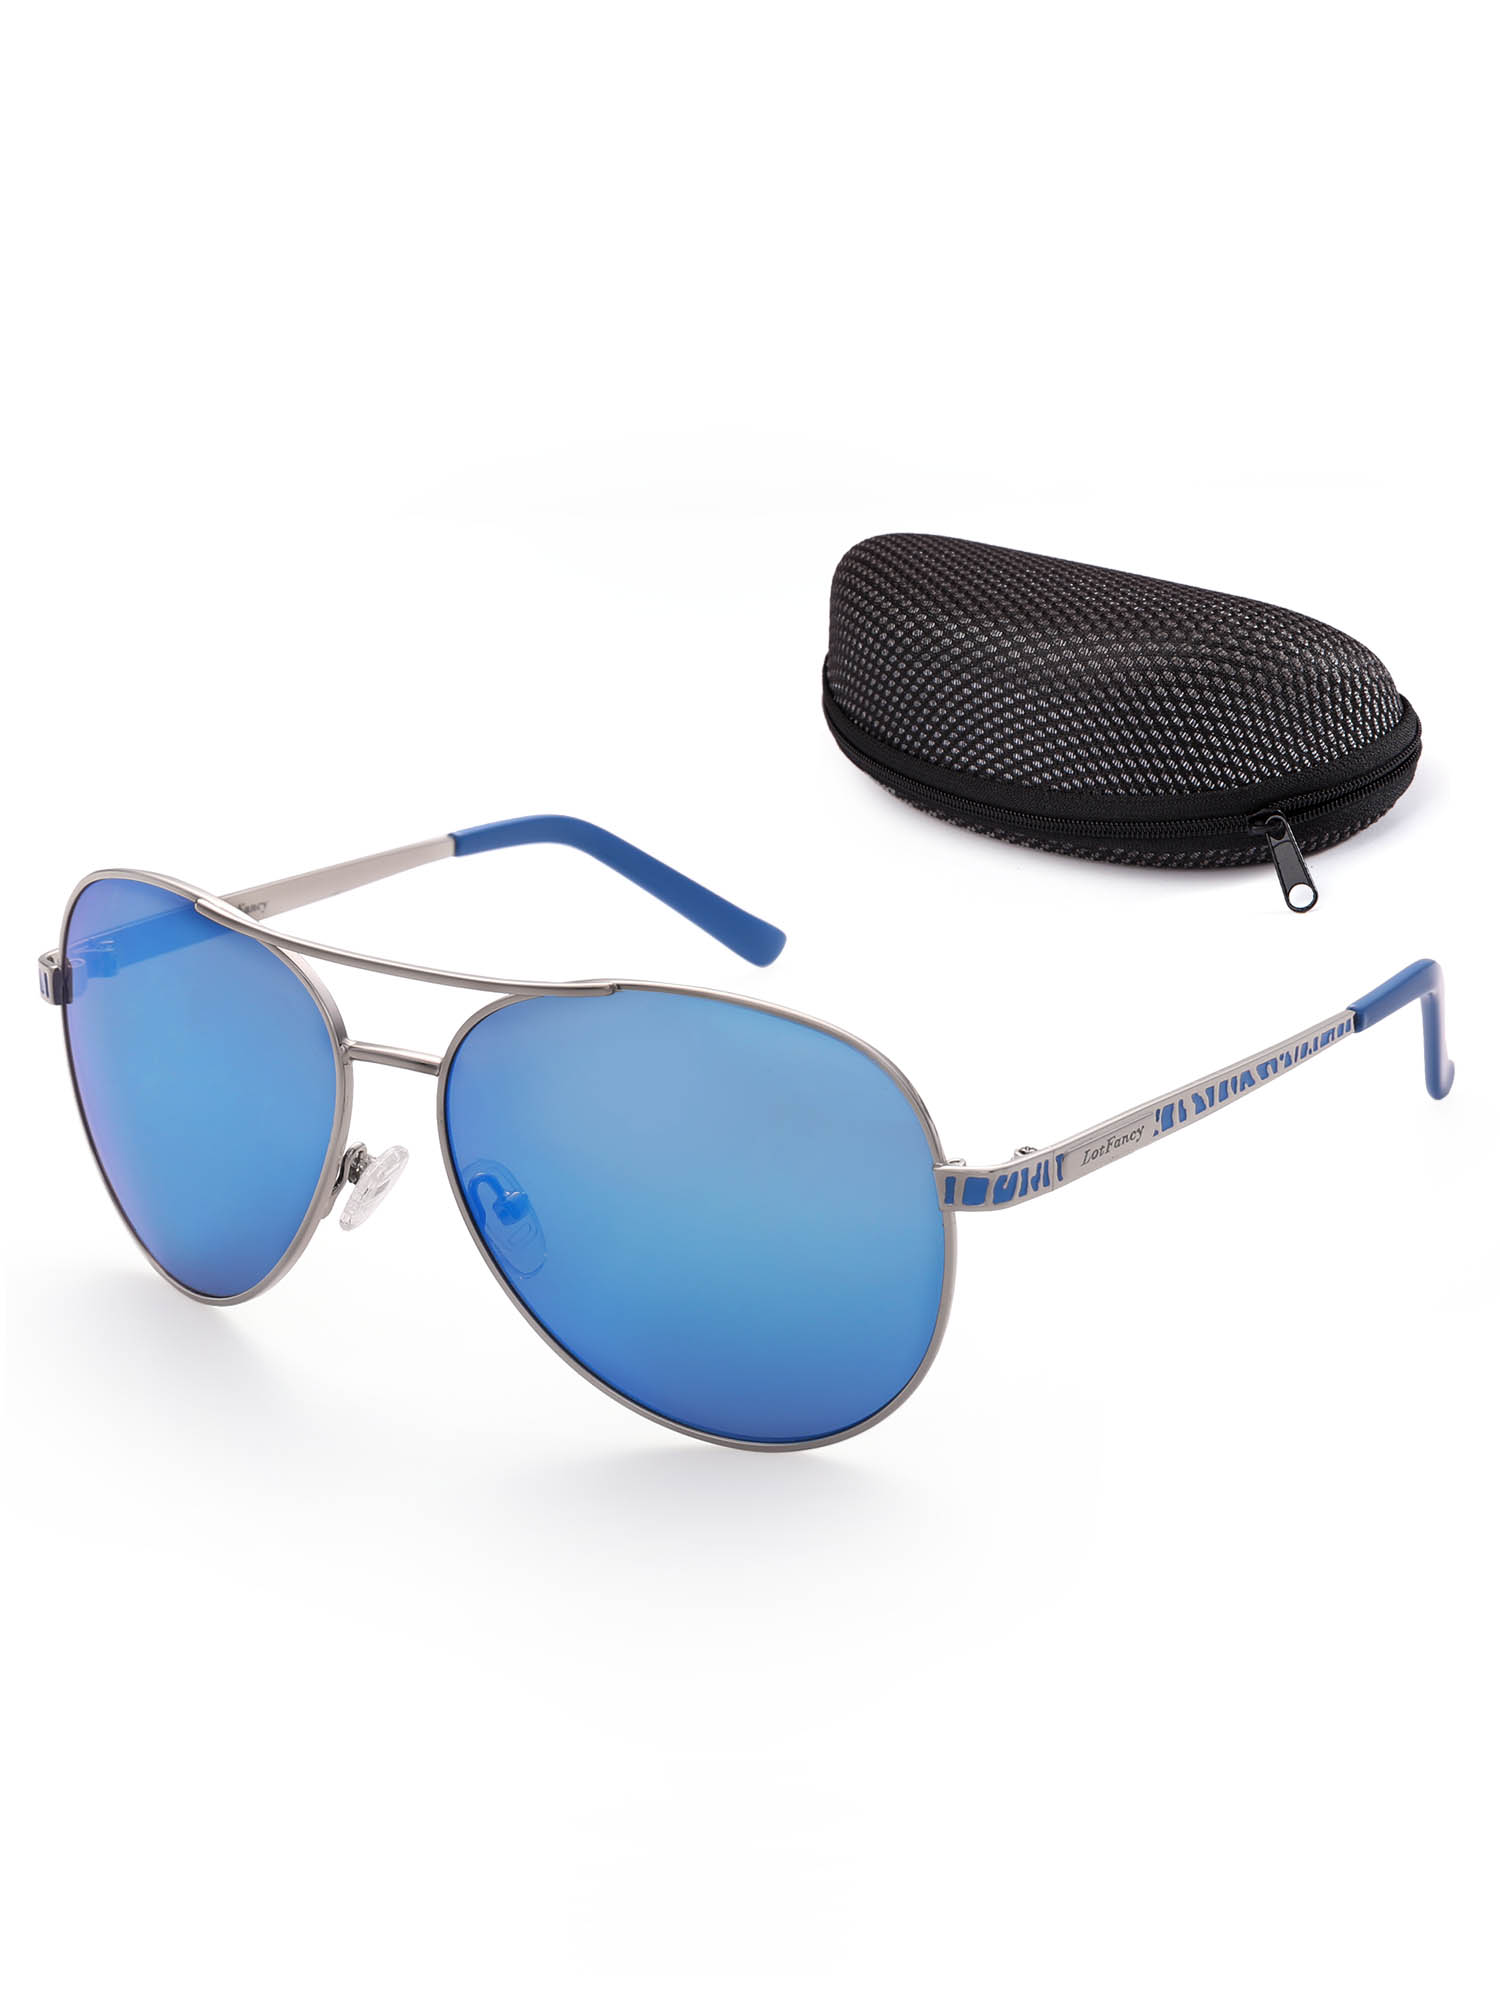 Aviator Sunglasses for Women with Case, Blue Mirrored, 61mm - image 1 of 10